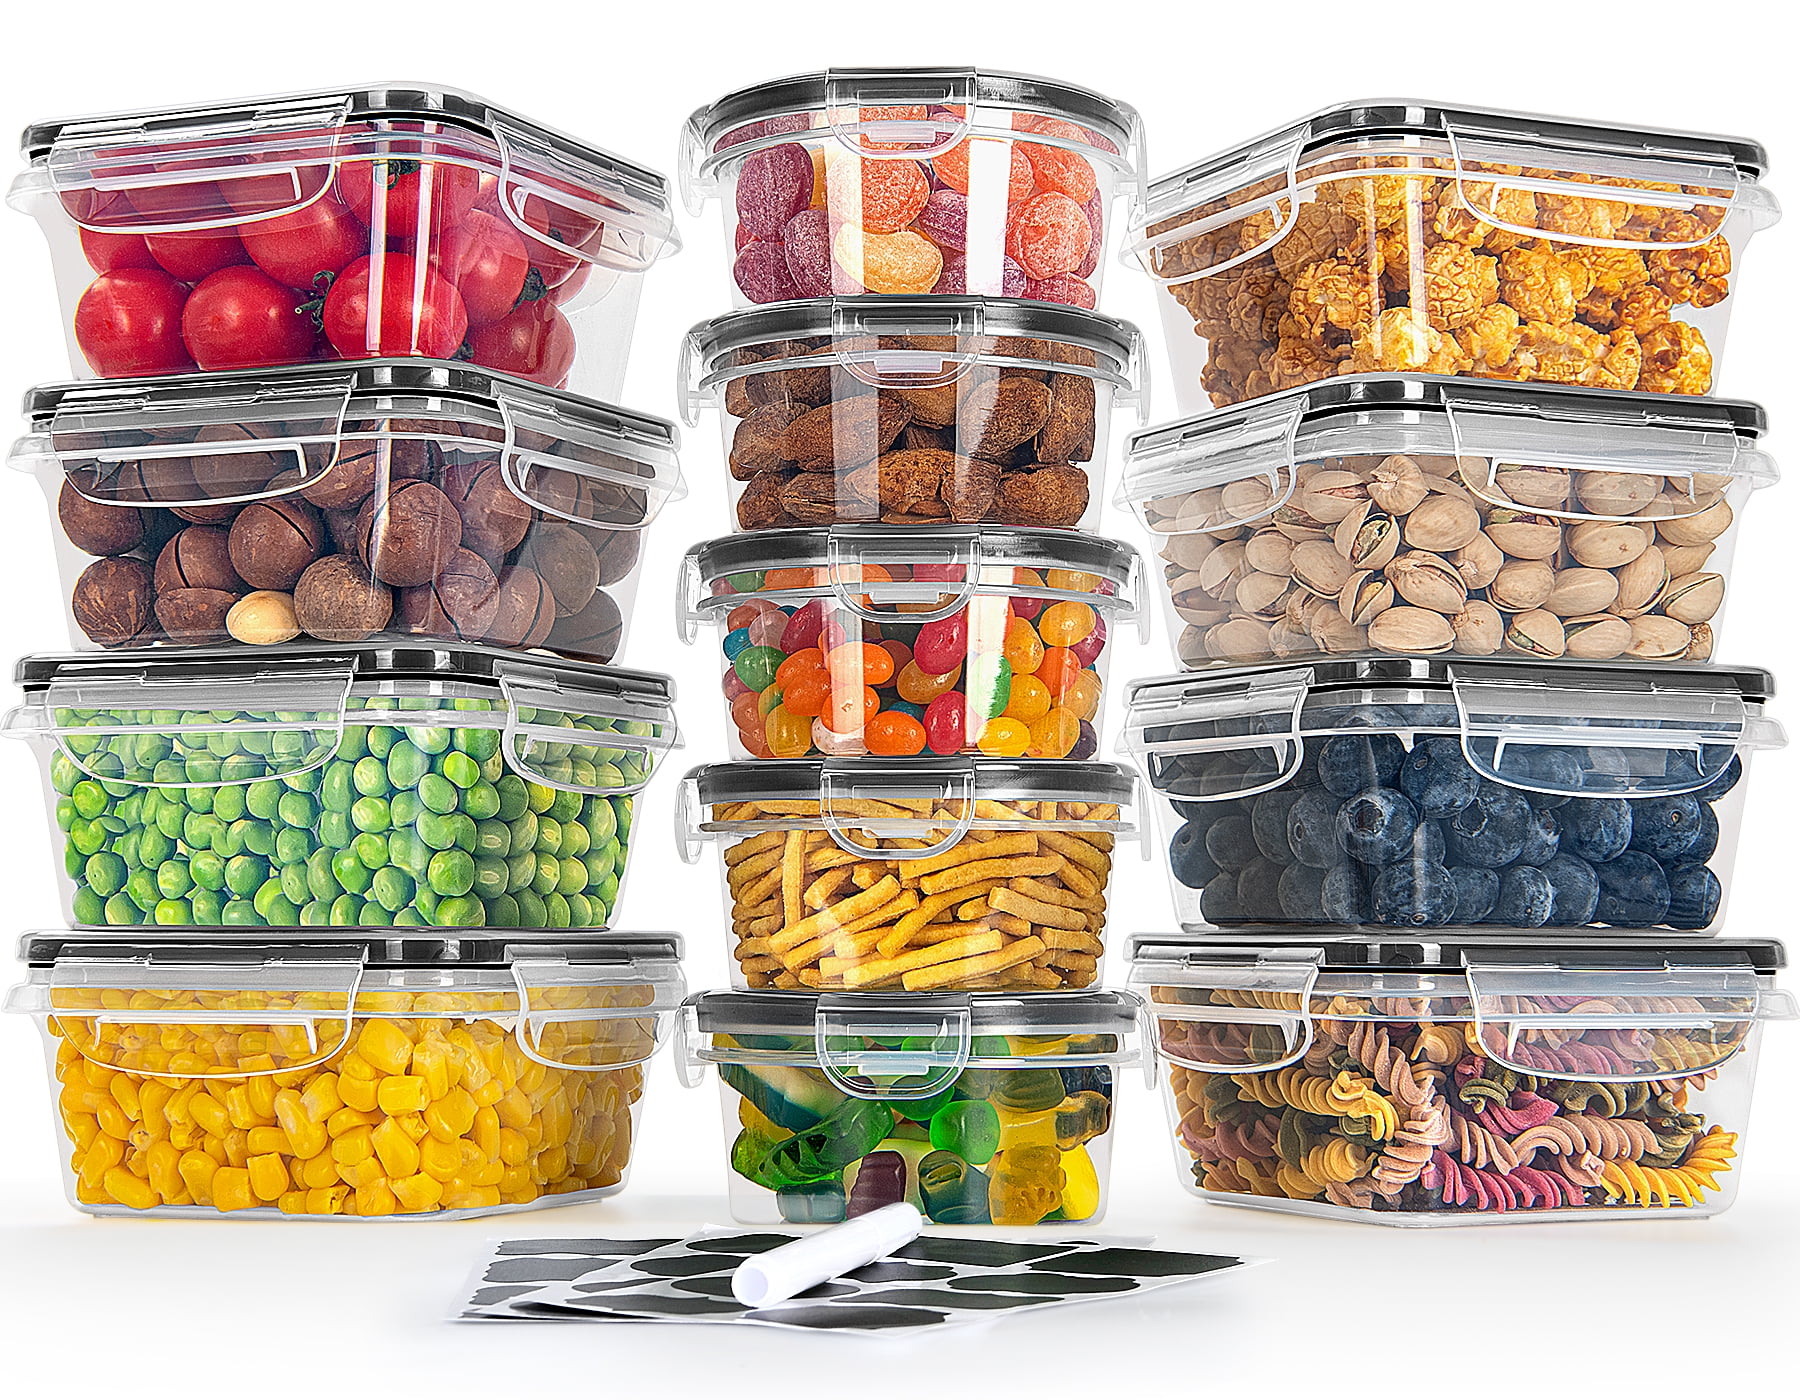 Rubbermaid 1.3 Cup Small Brilliance - Shop Food Storage at H-E-B